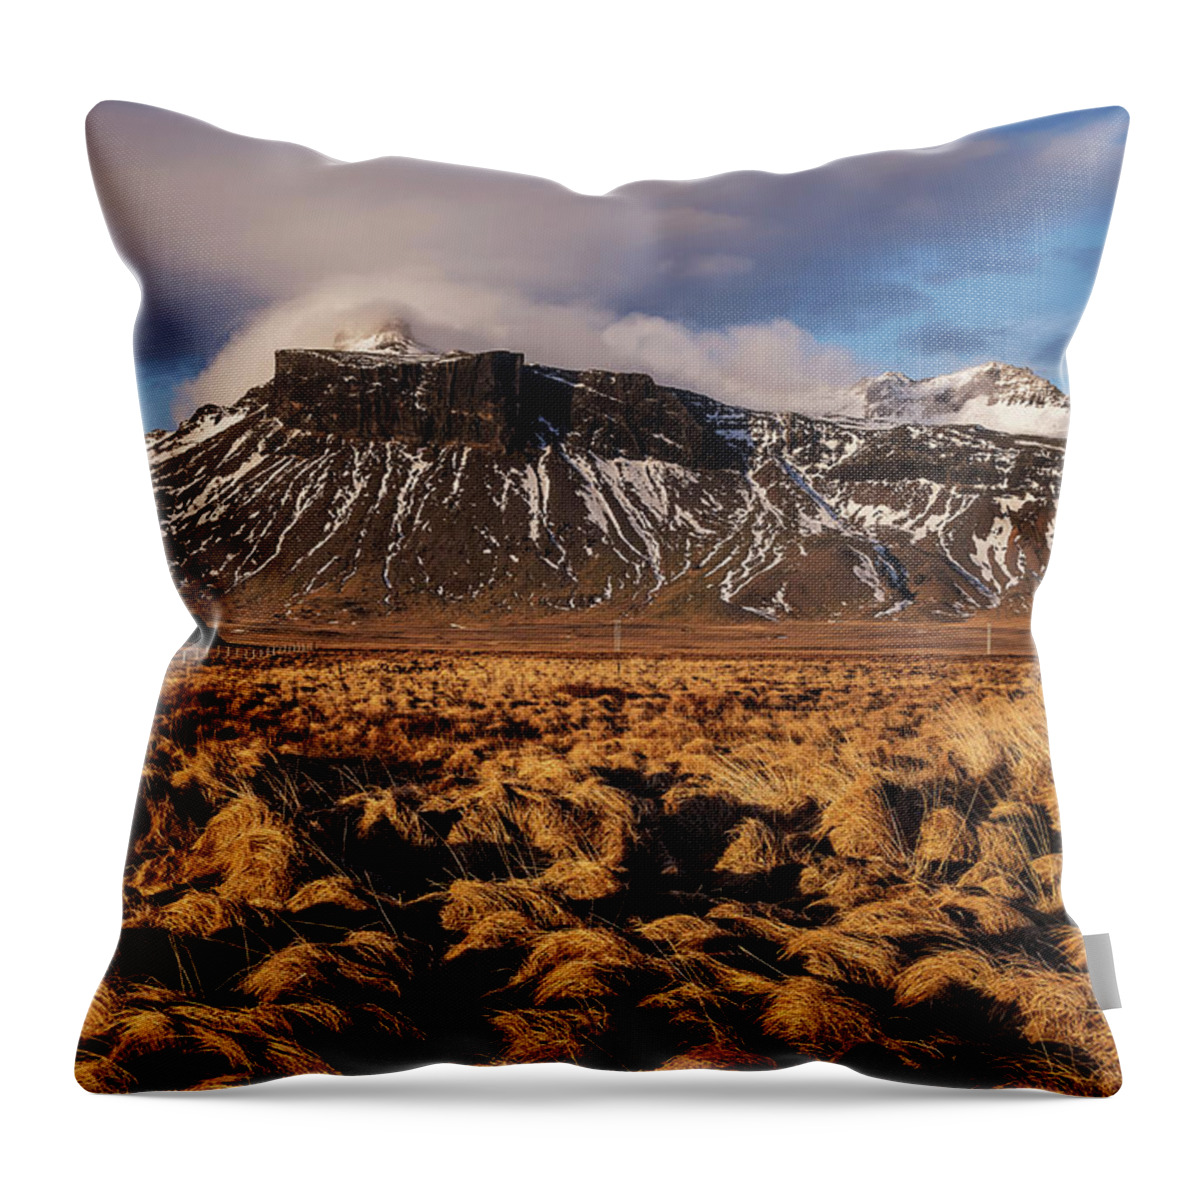 Landscape Throw Pillow featuring the photograph Mountain and land, Iceland by Pradeep Raja Prints